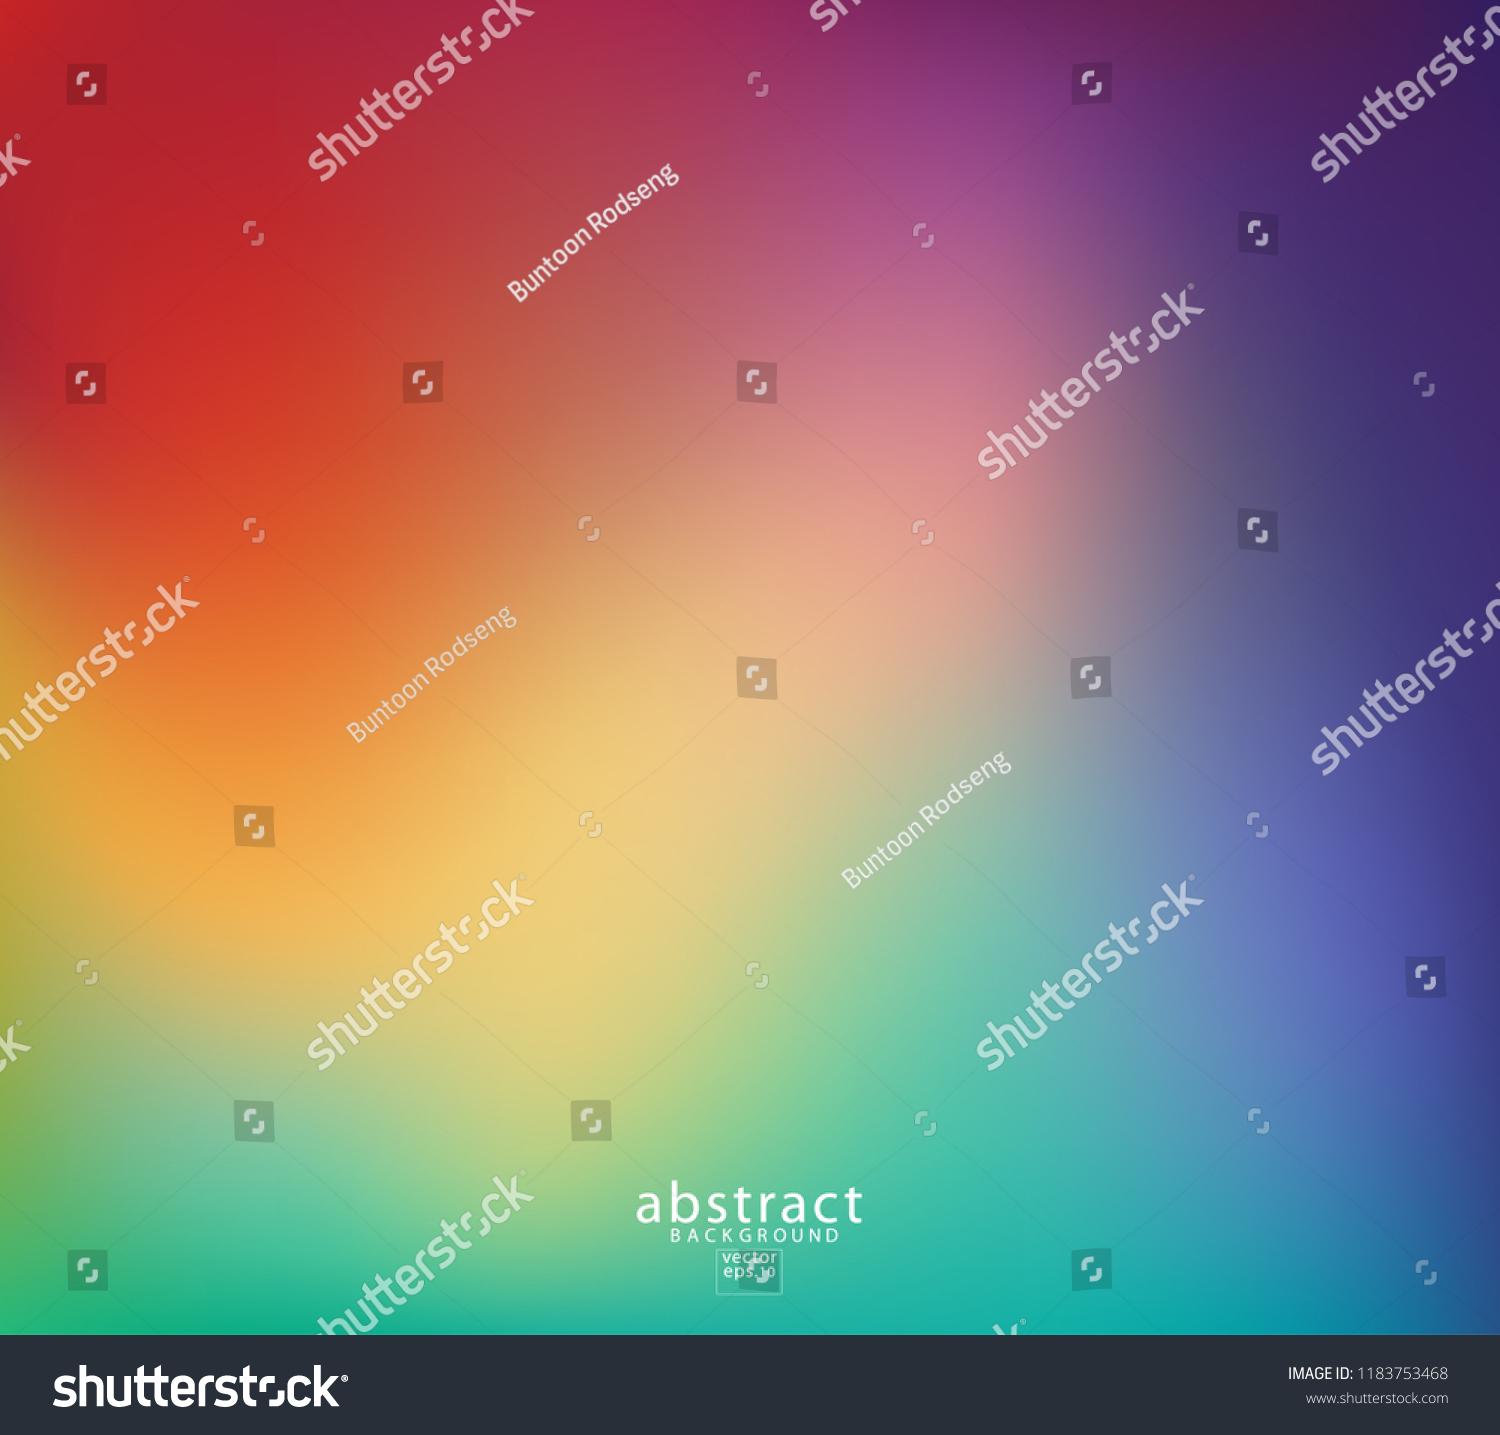 Abstract blurred gradient mesh background bright rainbow colors. Colorful smooth soft banner template. Creative vibrant vector illustration #1183753468